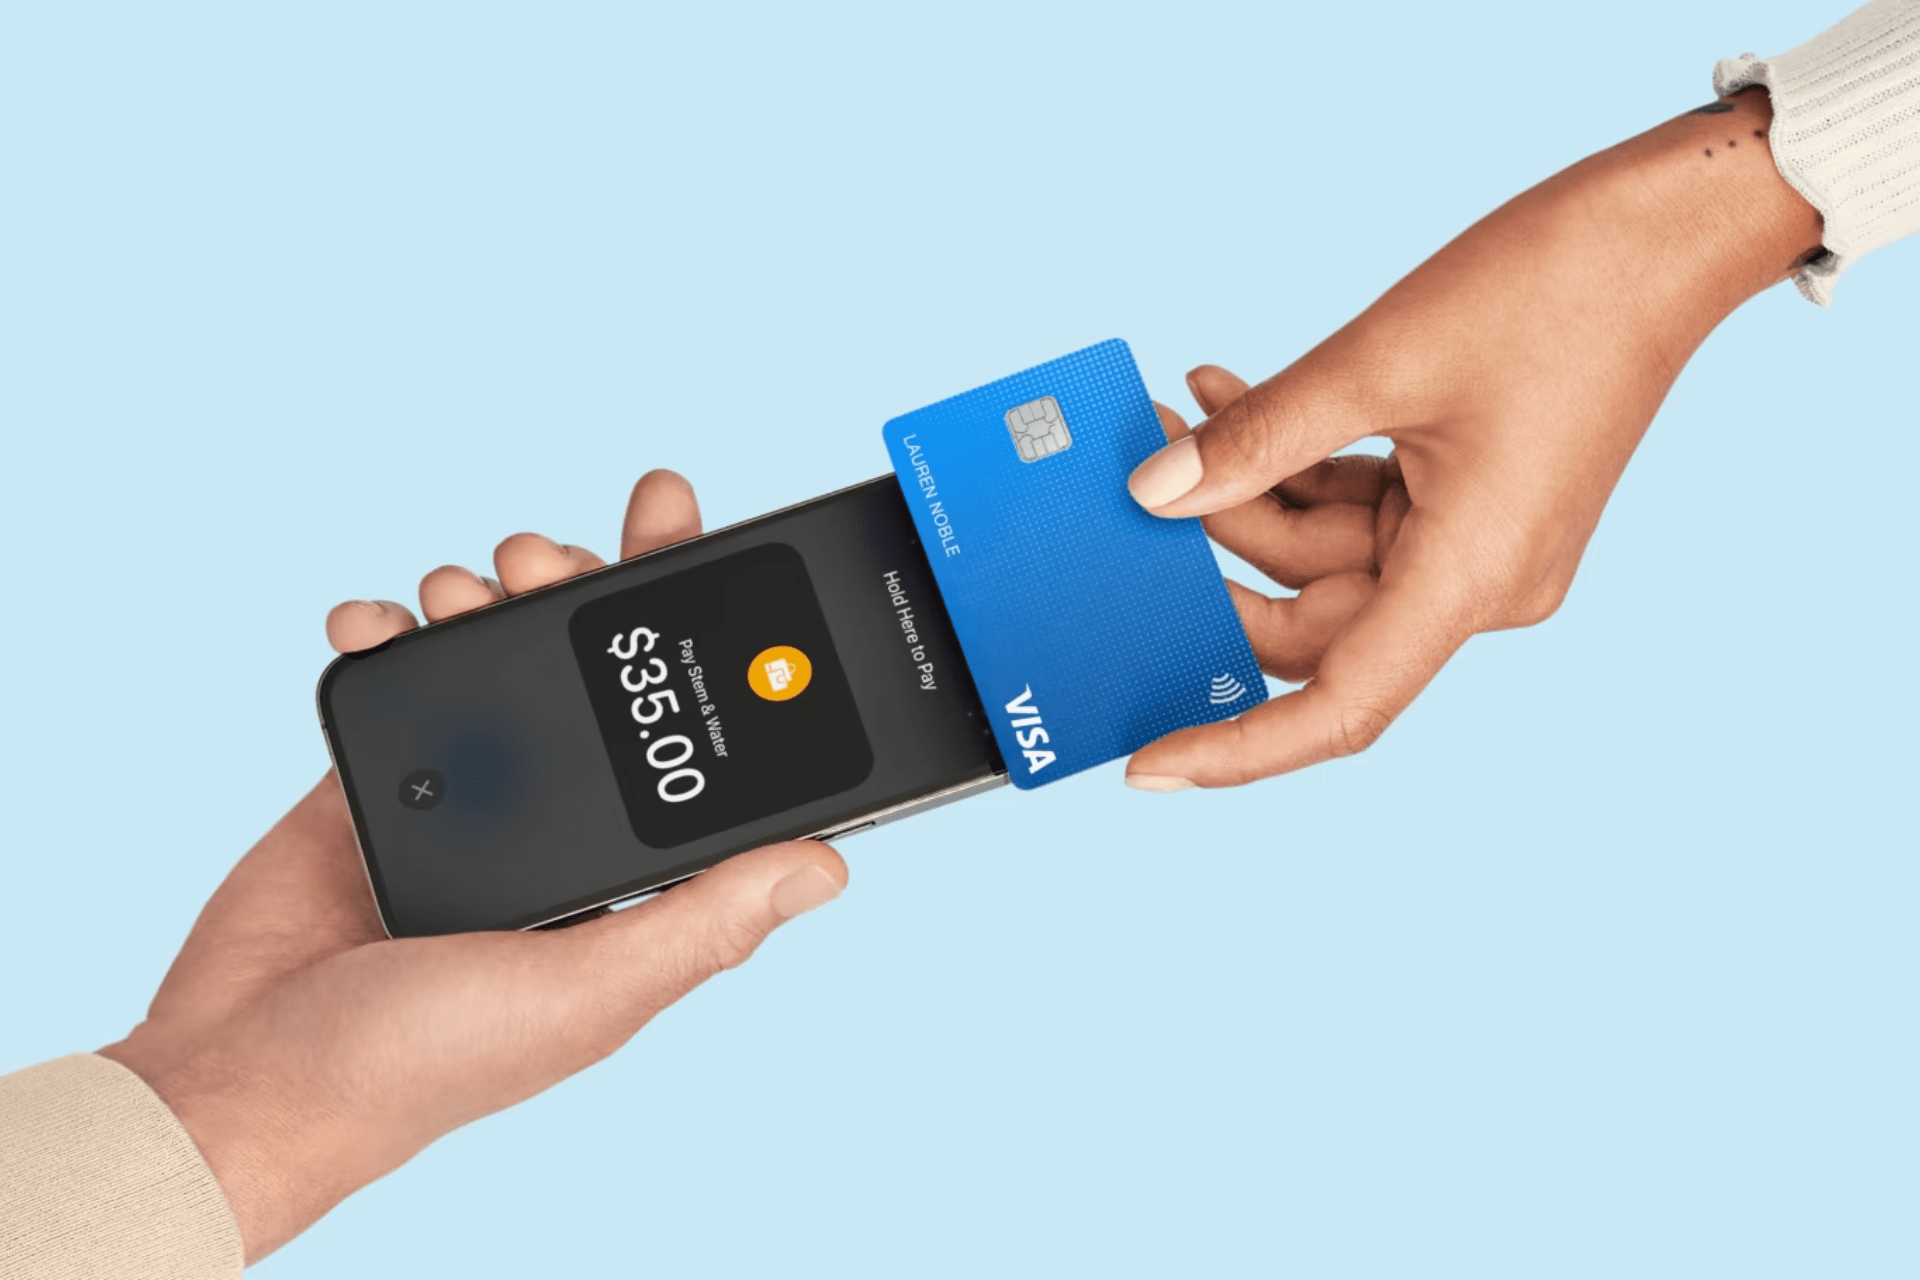 Square Integrates Tap to Pay on iPhone for US Sellers